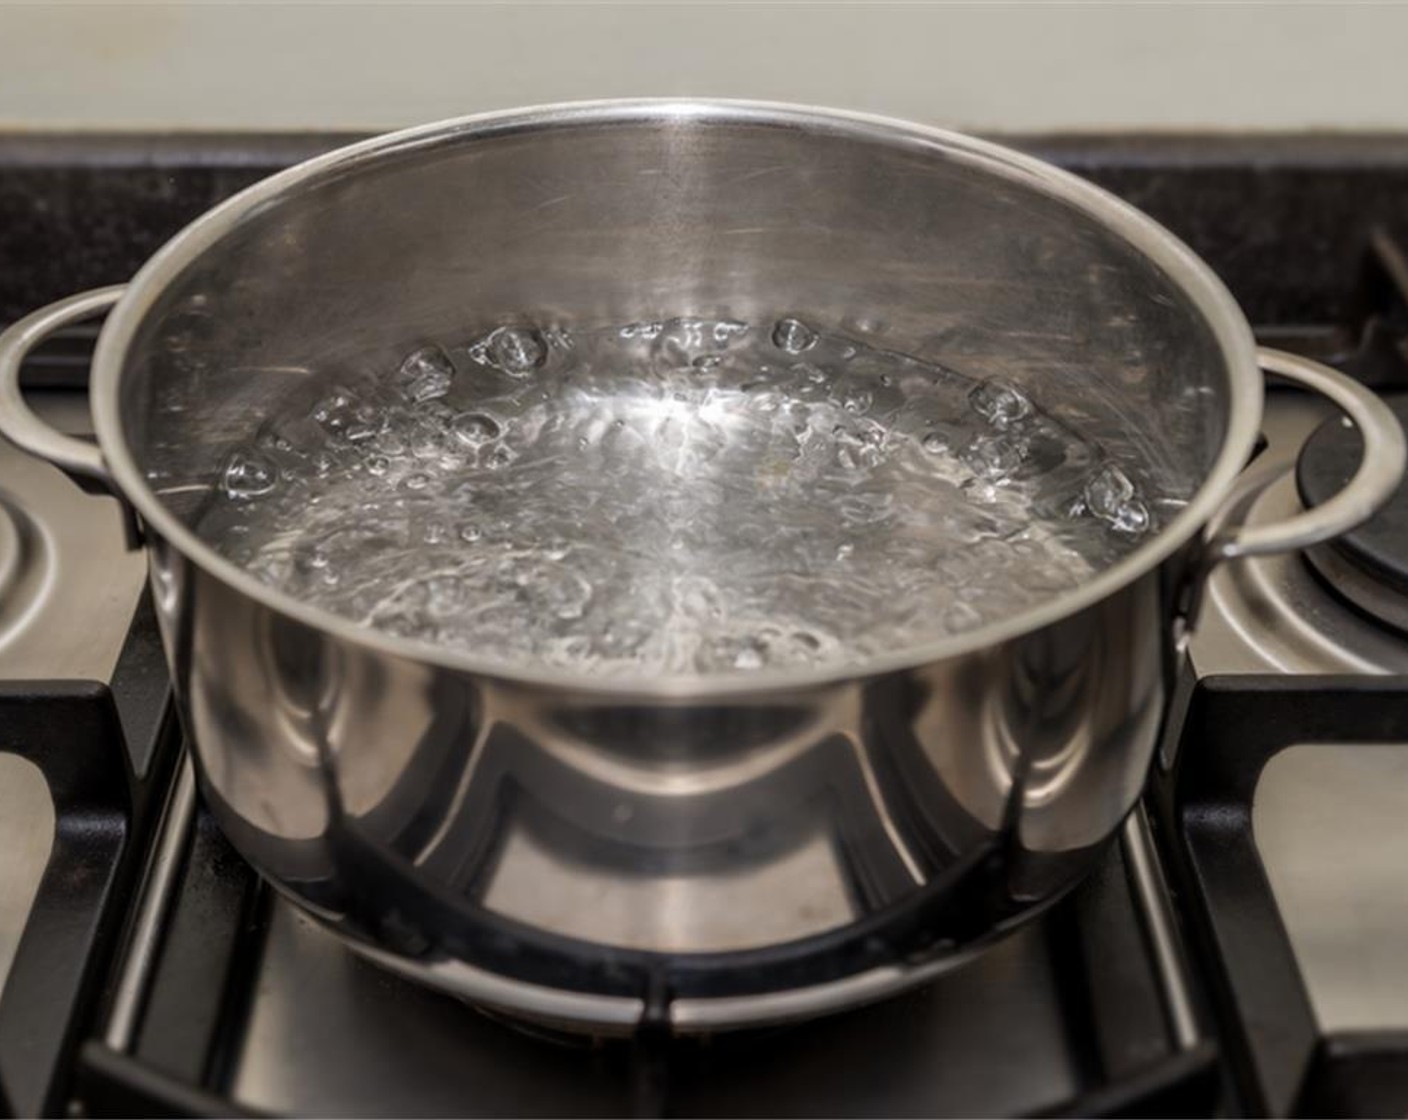 step 2 Bring 4 cups of water and 2 teaspoons of salt to aboil in a medium saucepot over medium-high heat.